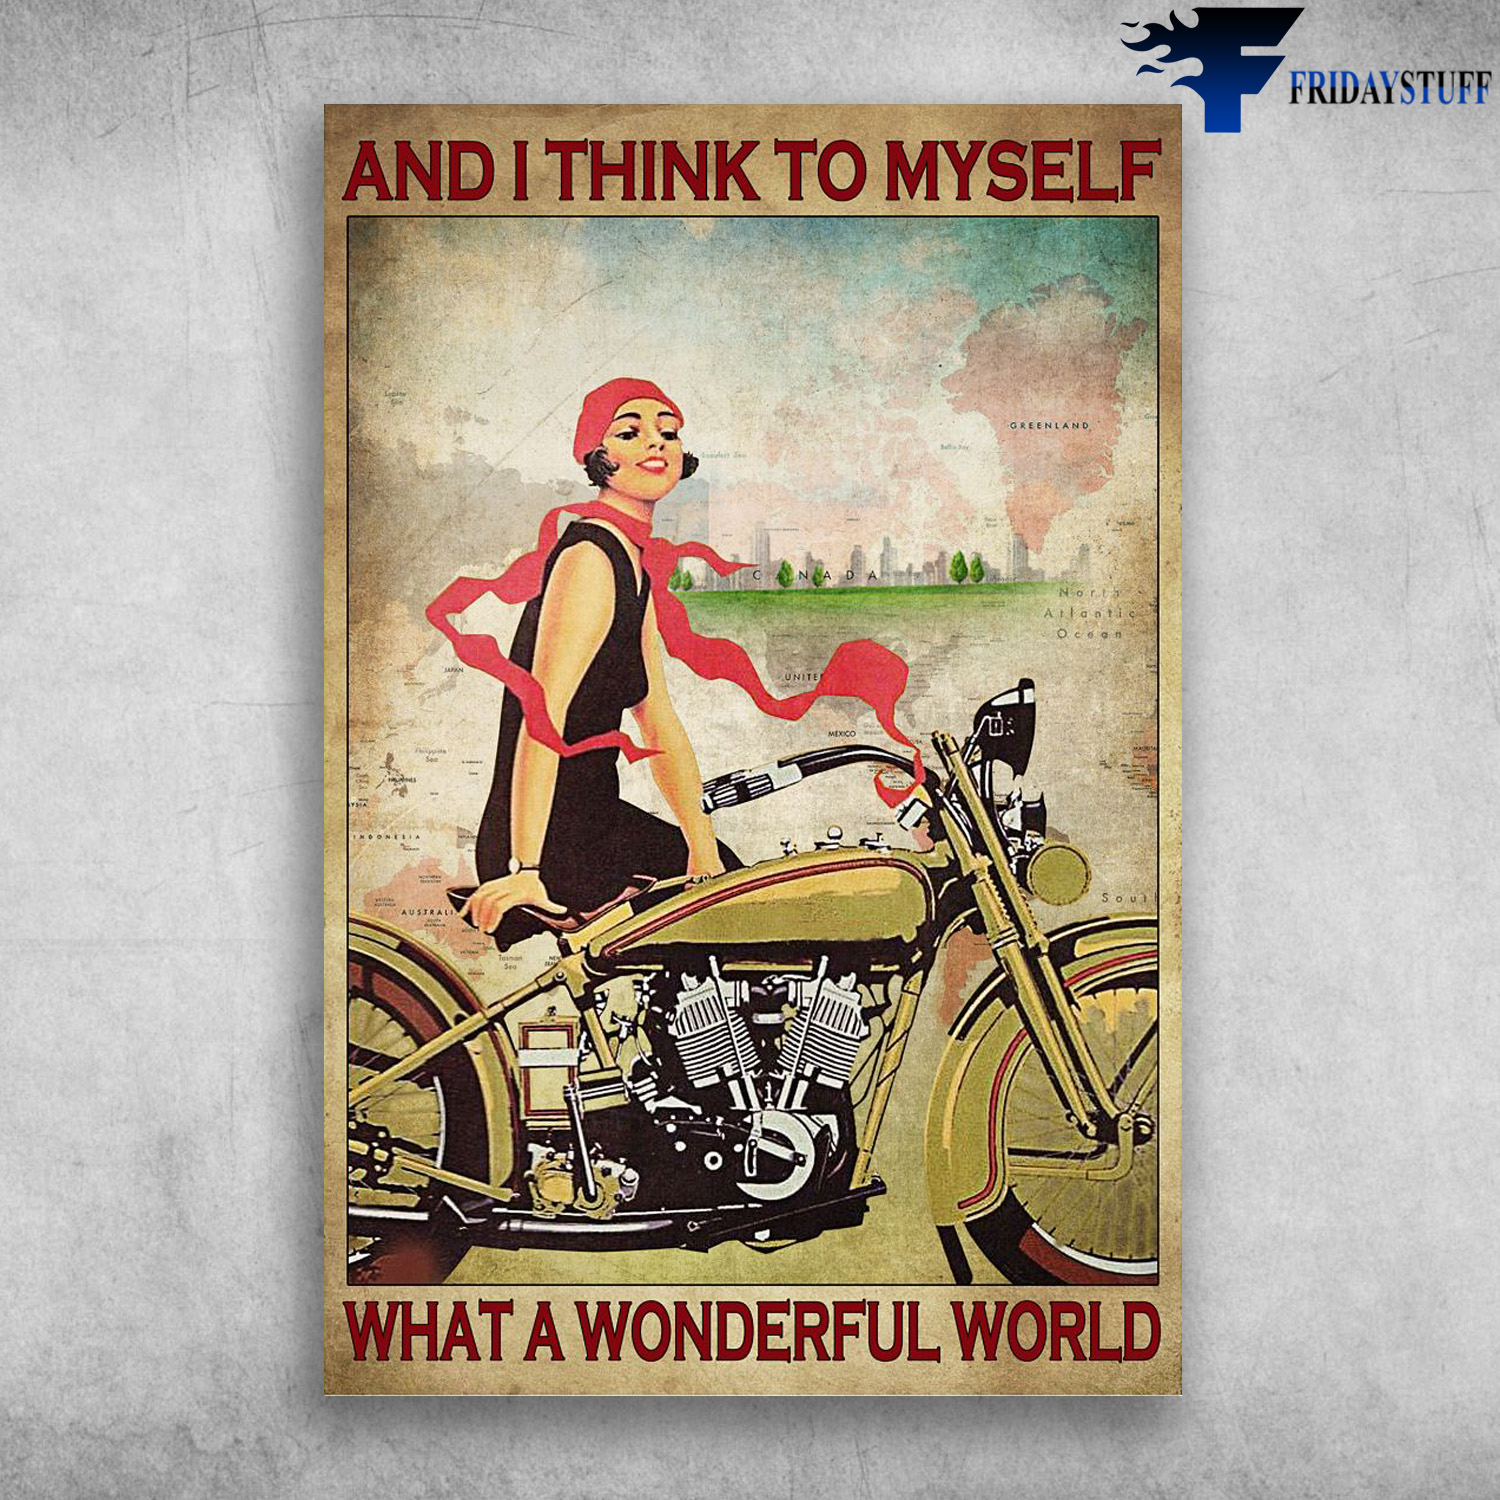 Girl Riding Motorcycle - And I Think To Myself, What A Wonderful World